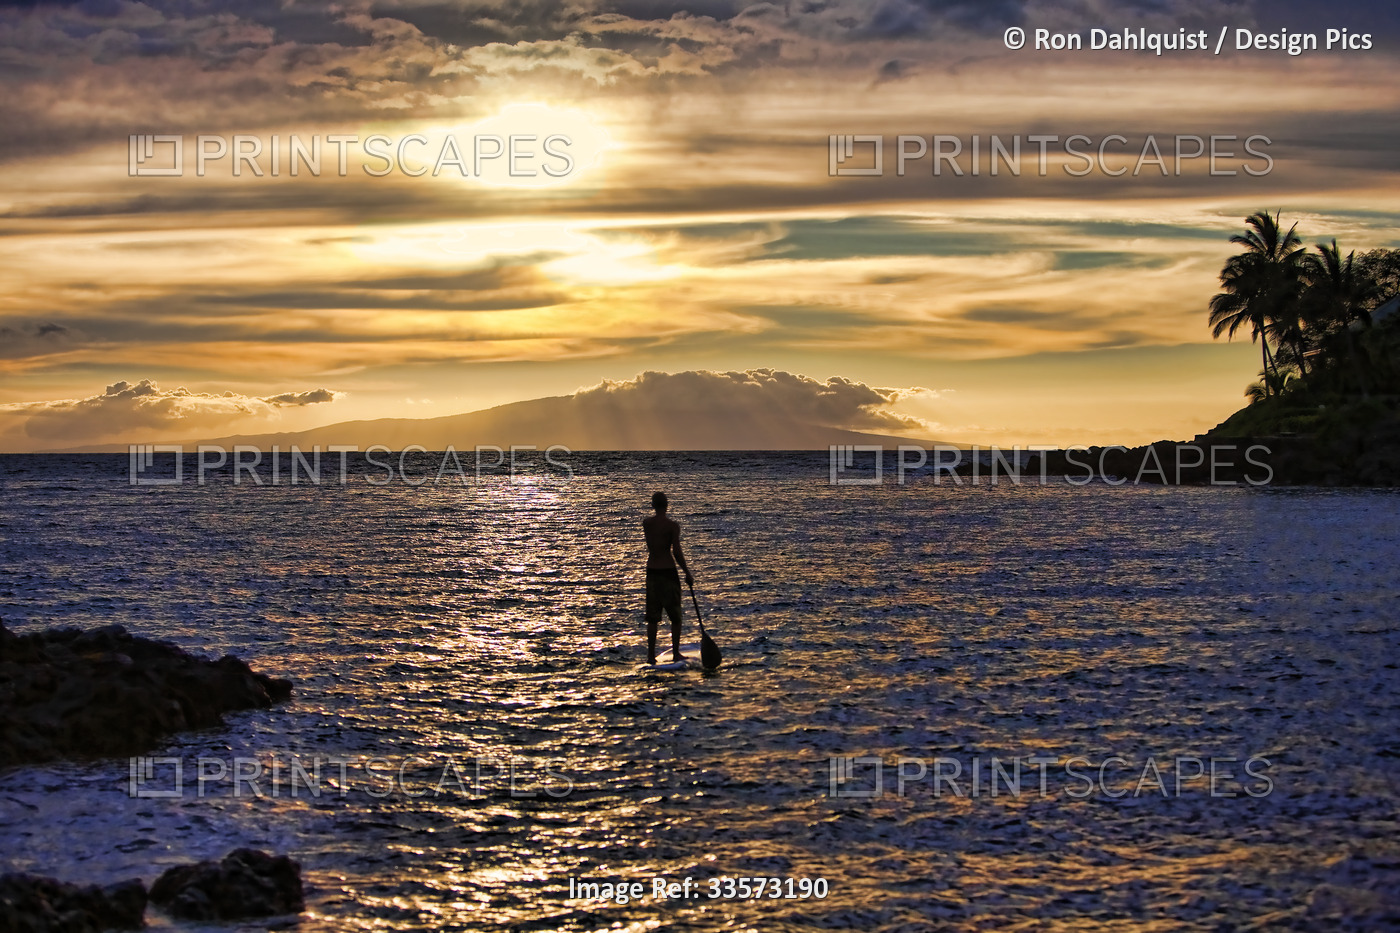 View taken from behind of a stand-up paddle boarder at sunset off Palau'ea ...